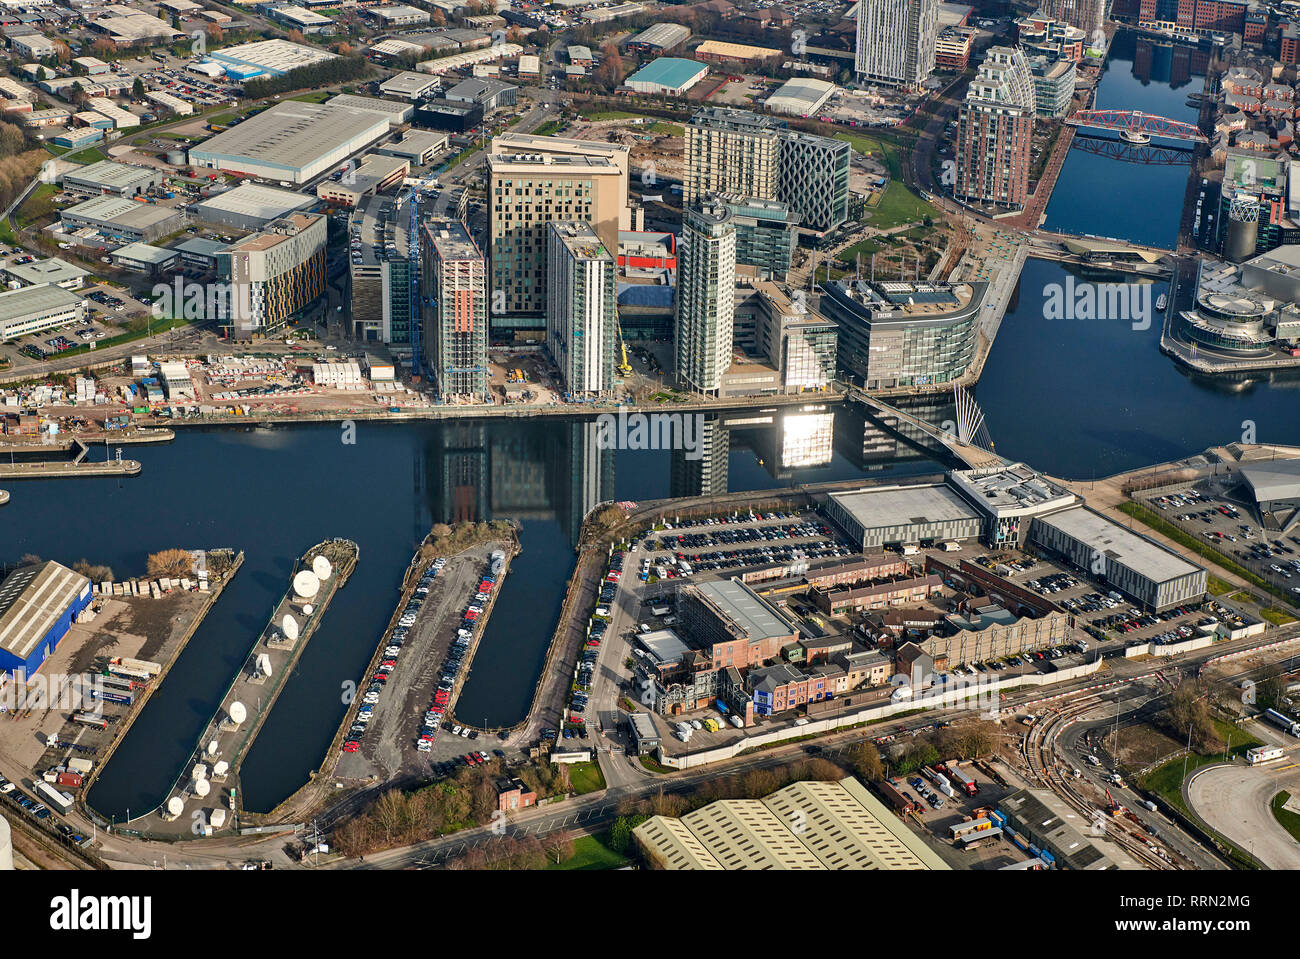 An aerial view of Media City, Salford Quays, Manchester, North West England, UK Stock Photo